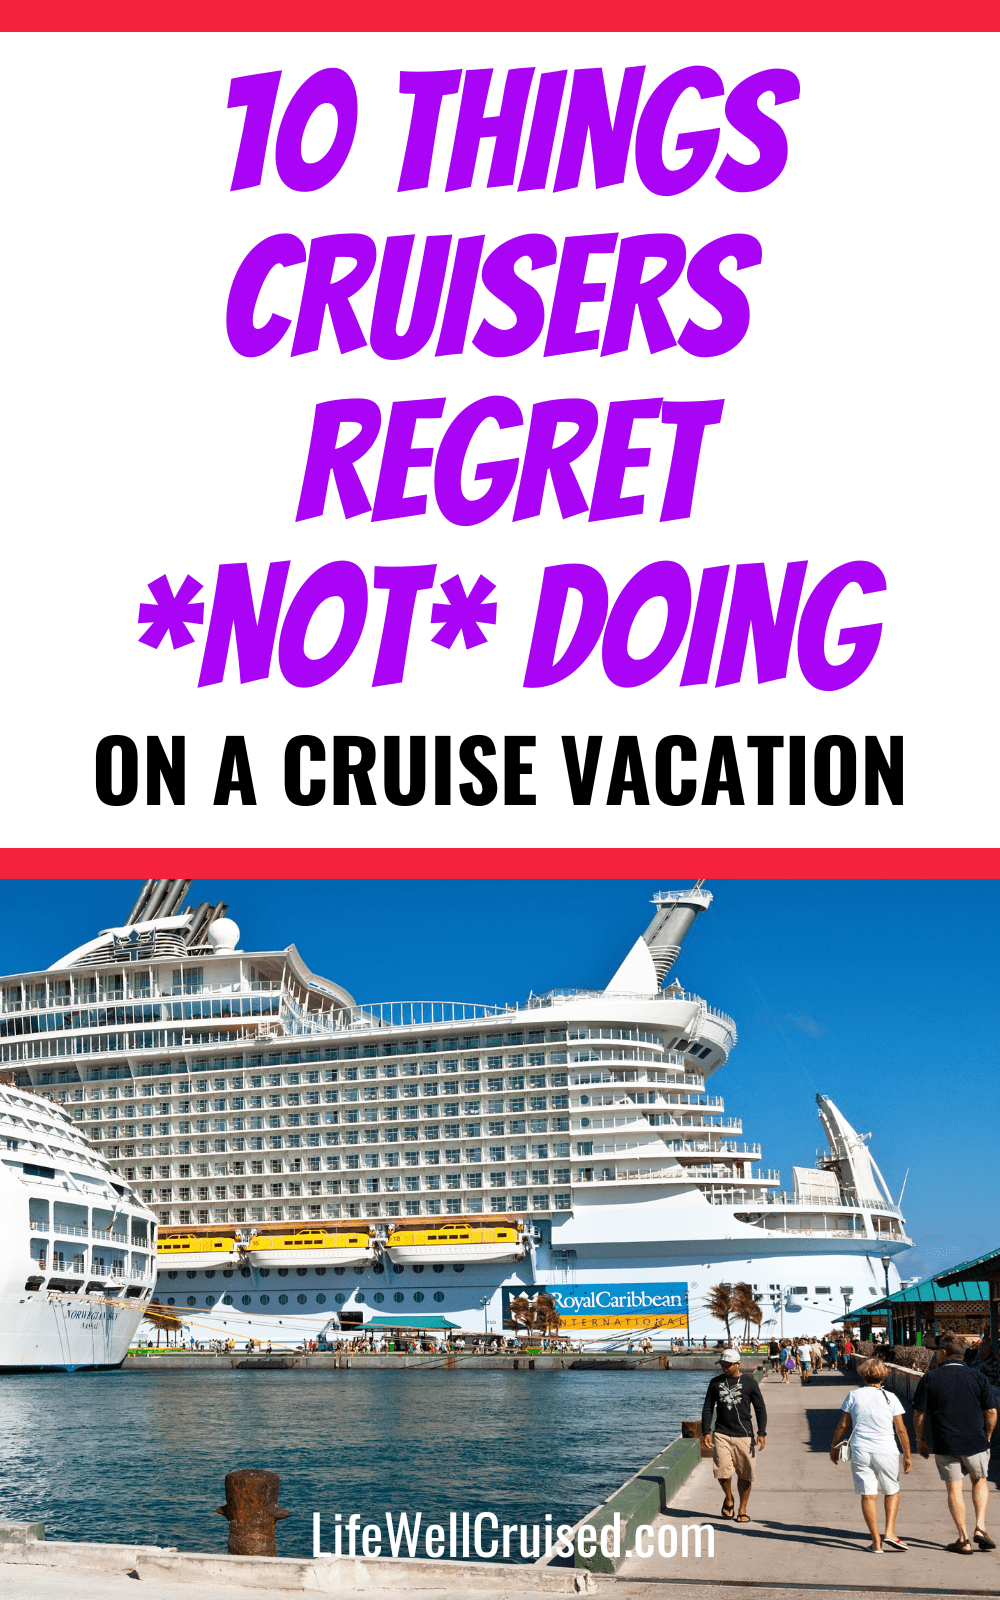 10 Things cruisers regret not doing on a cruise vacation